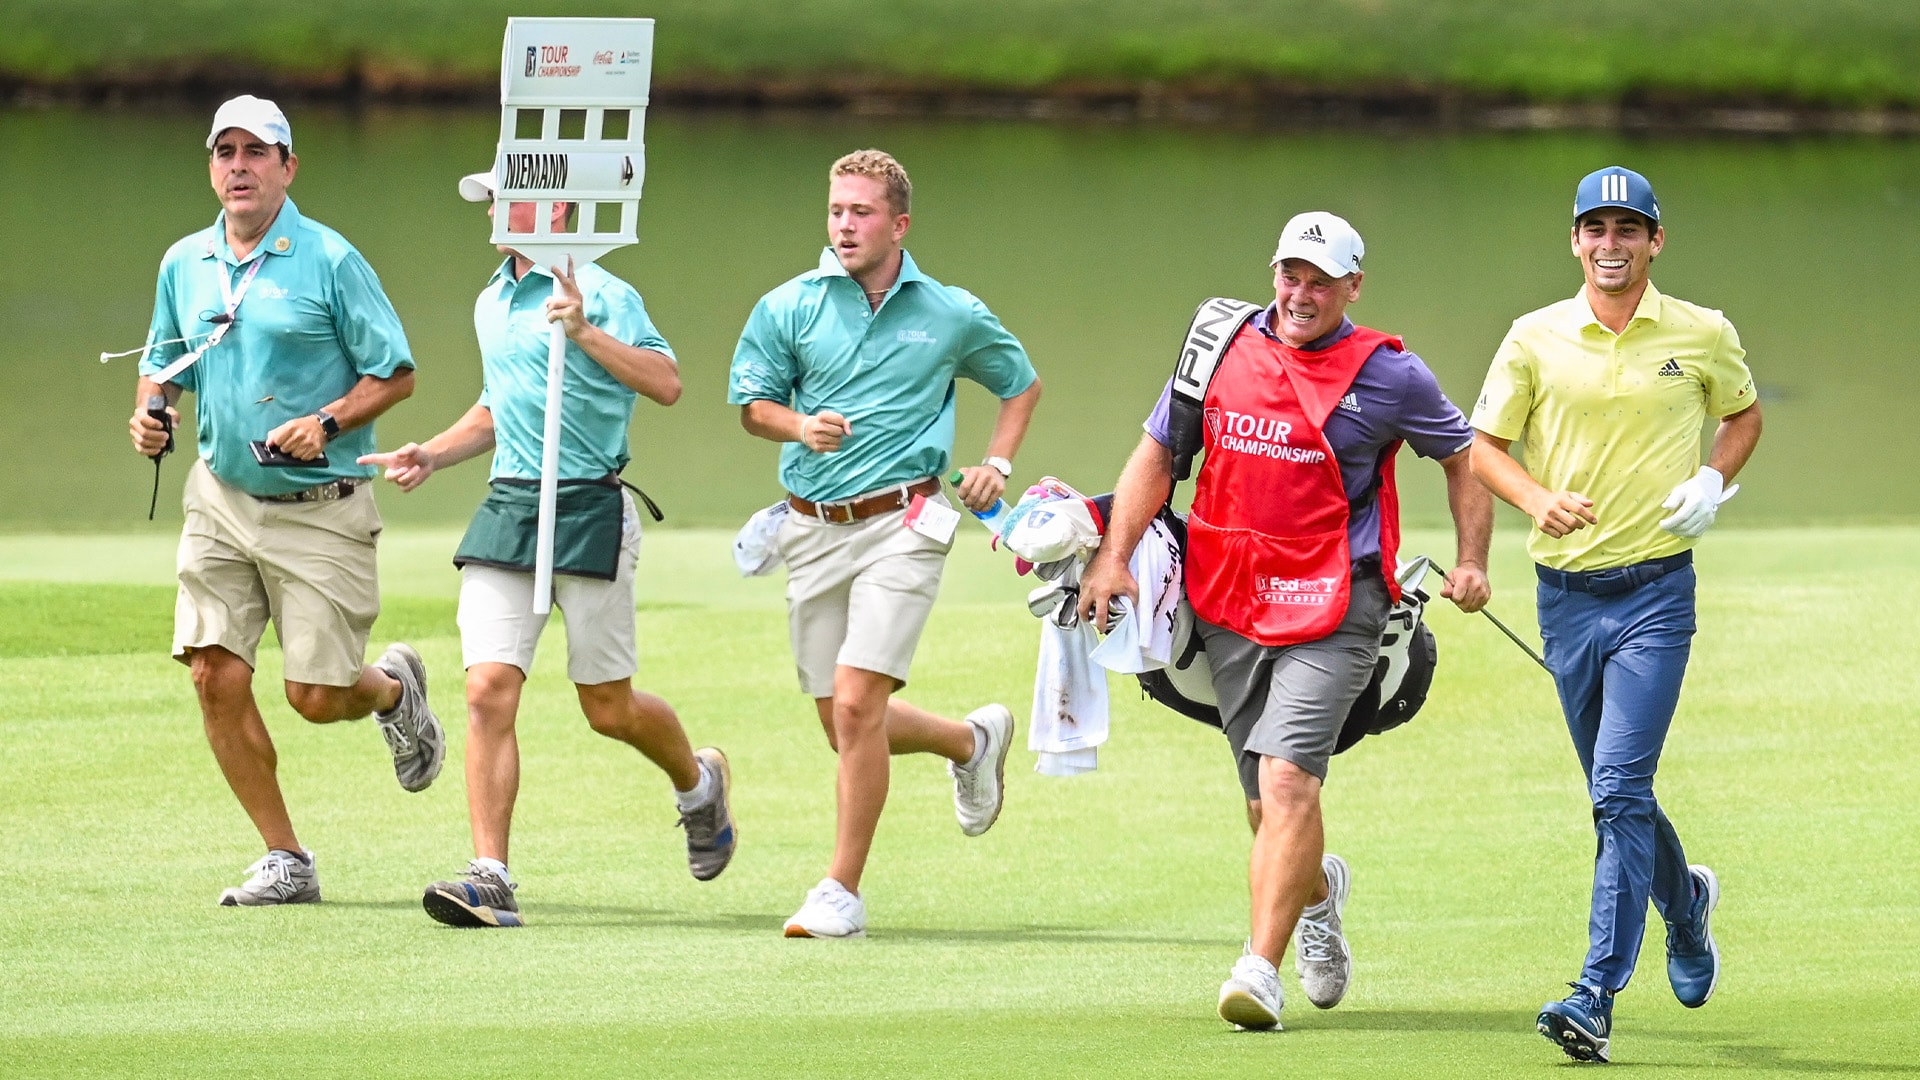 Joaquin Niemann and his caddie run to fastest round ever played at East Lake